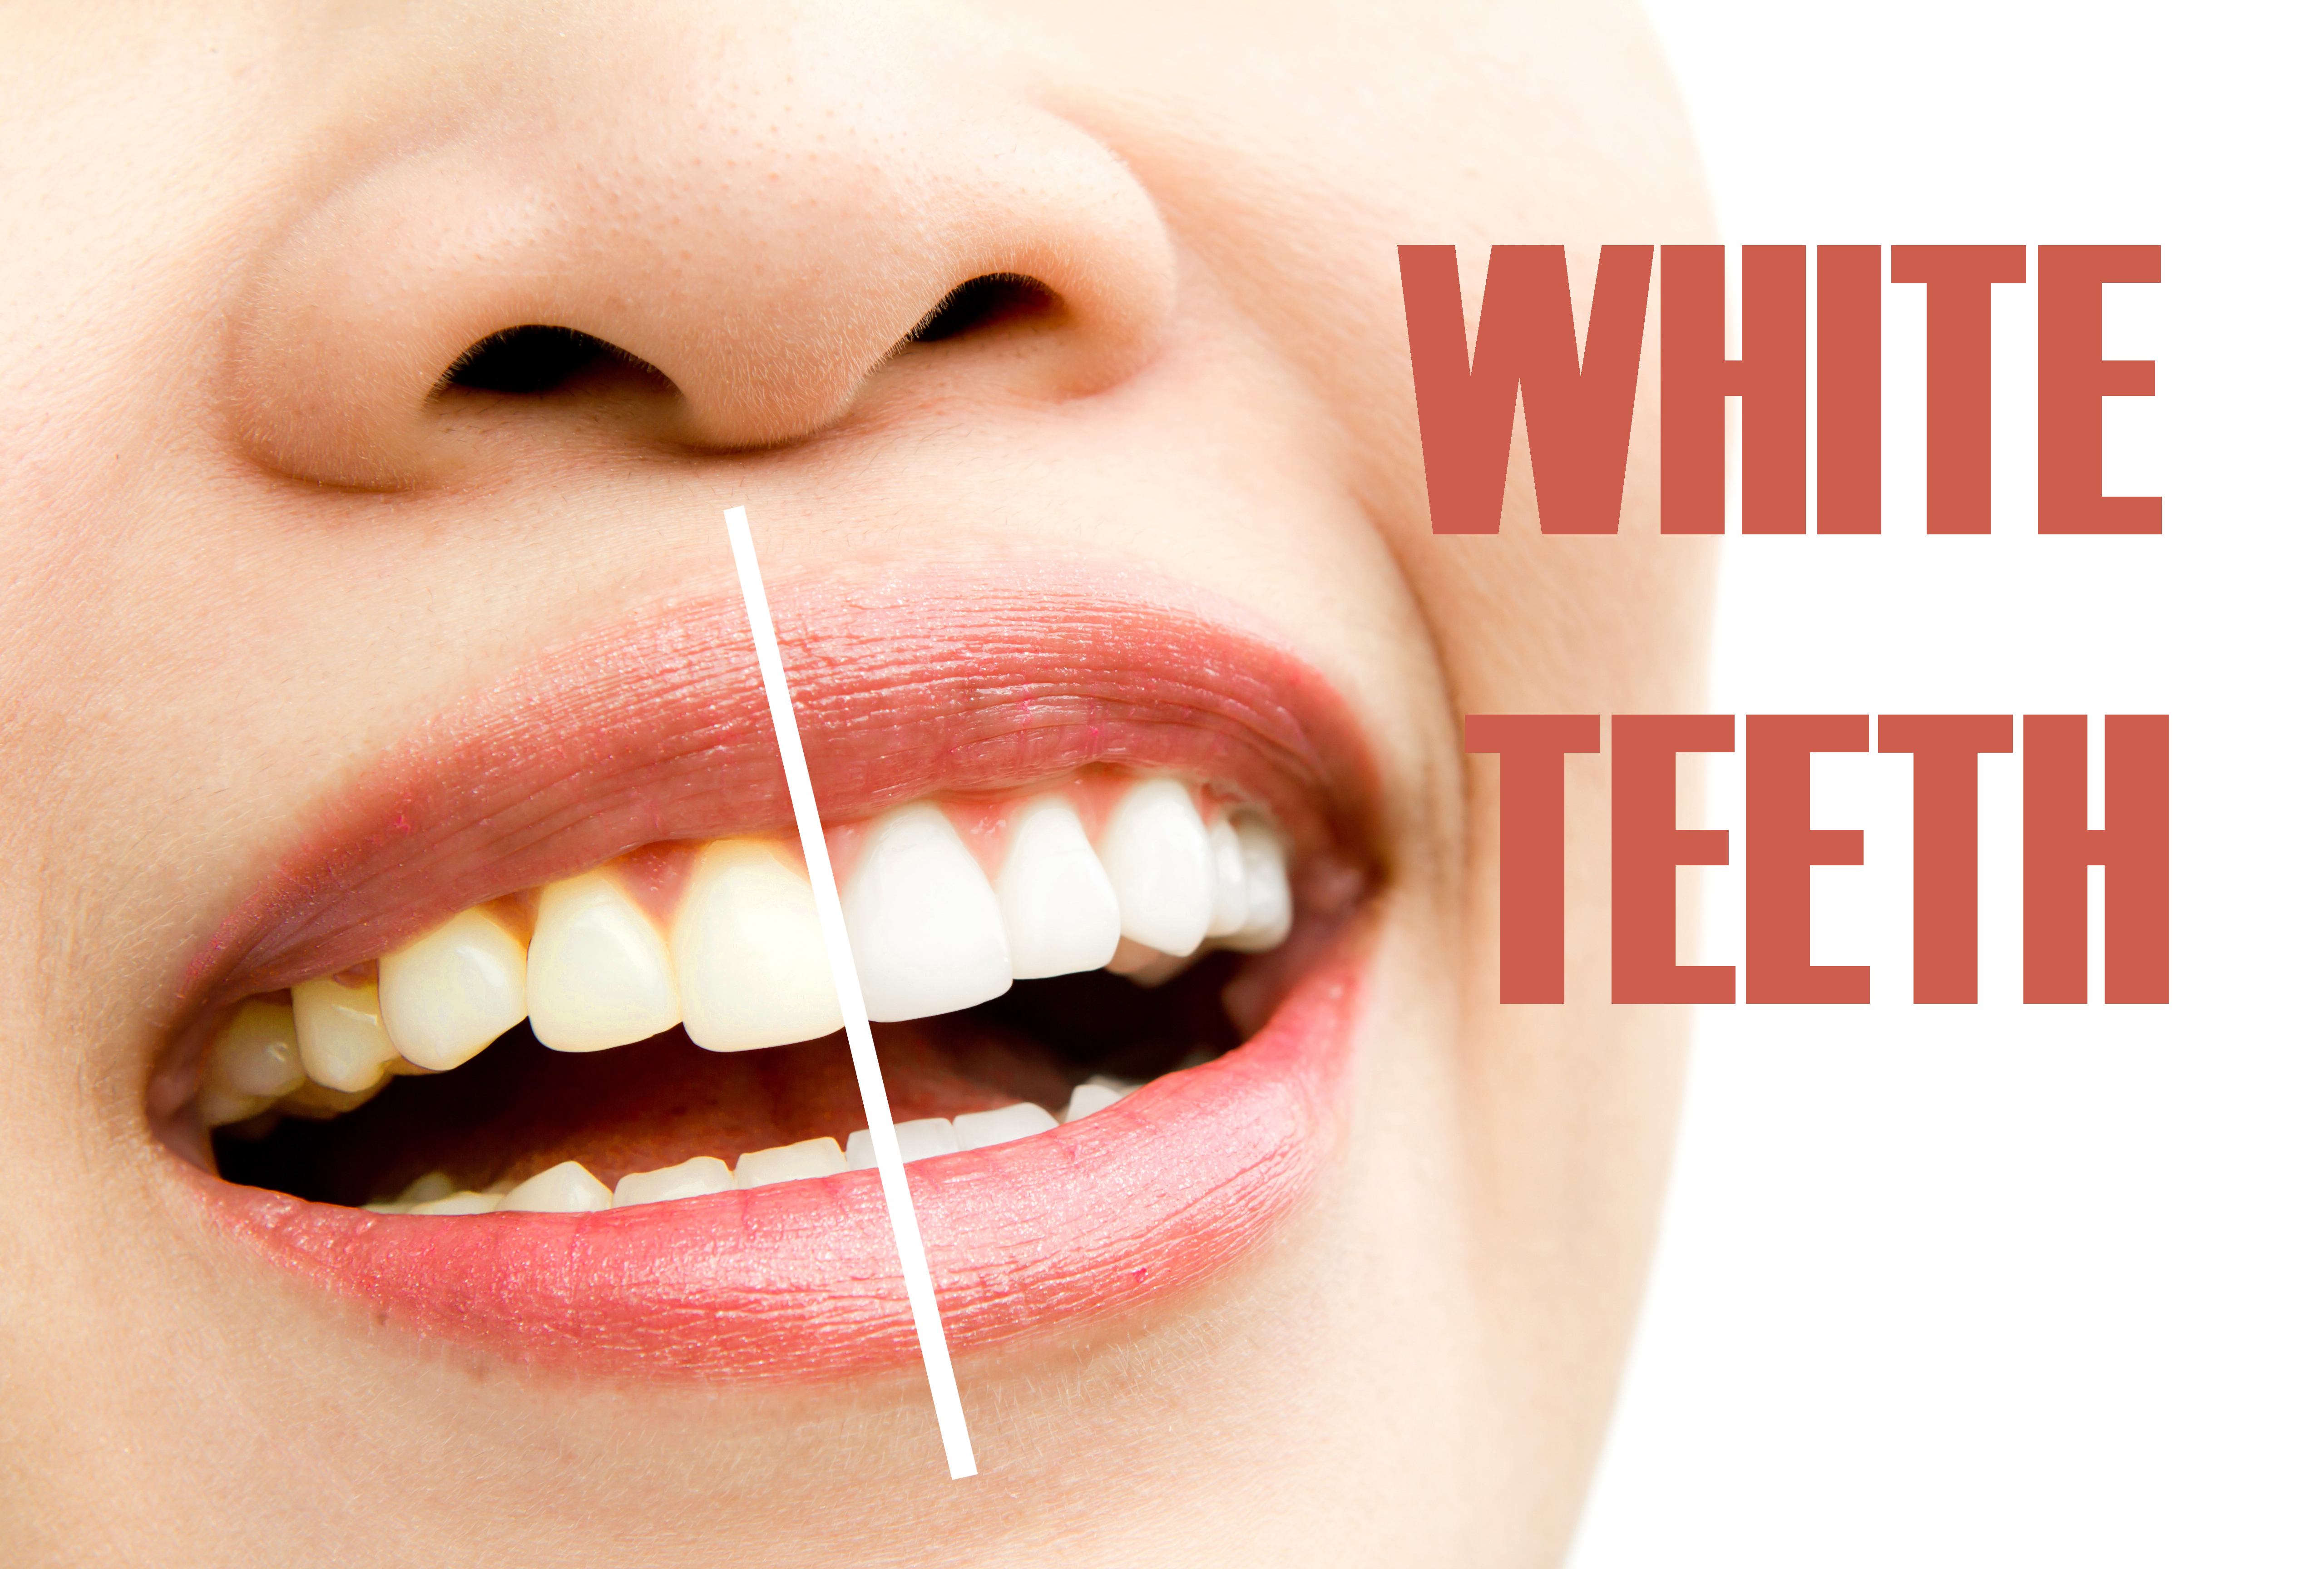 Top 10 reasons to stop smoking Have whiter teeth and fresher breath